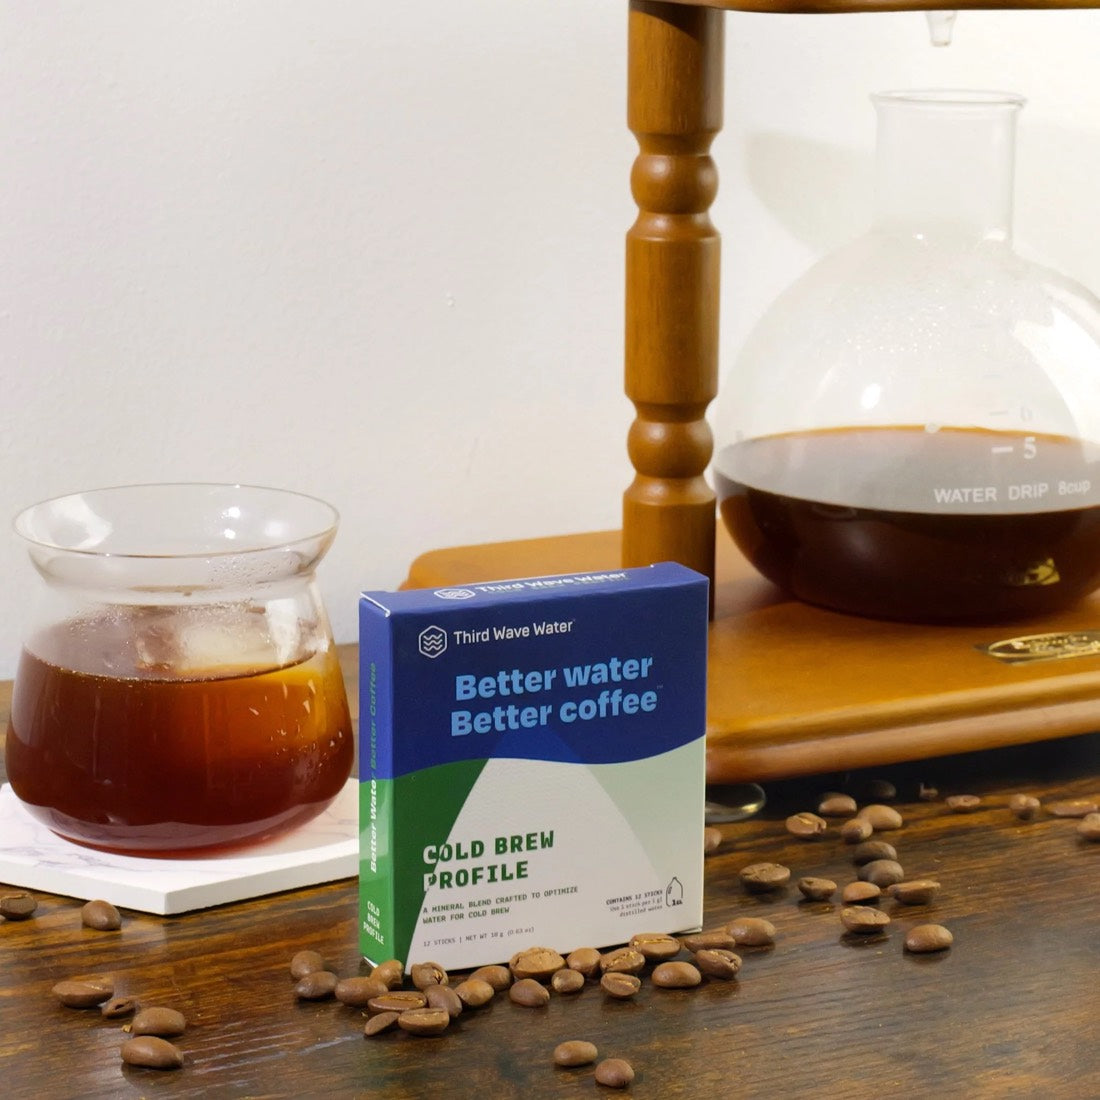 Third Wave Water - Cold Brew Profile - Mineral Packets - Image 2